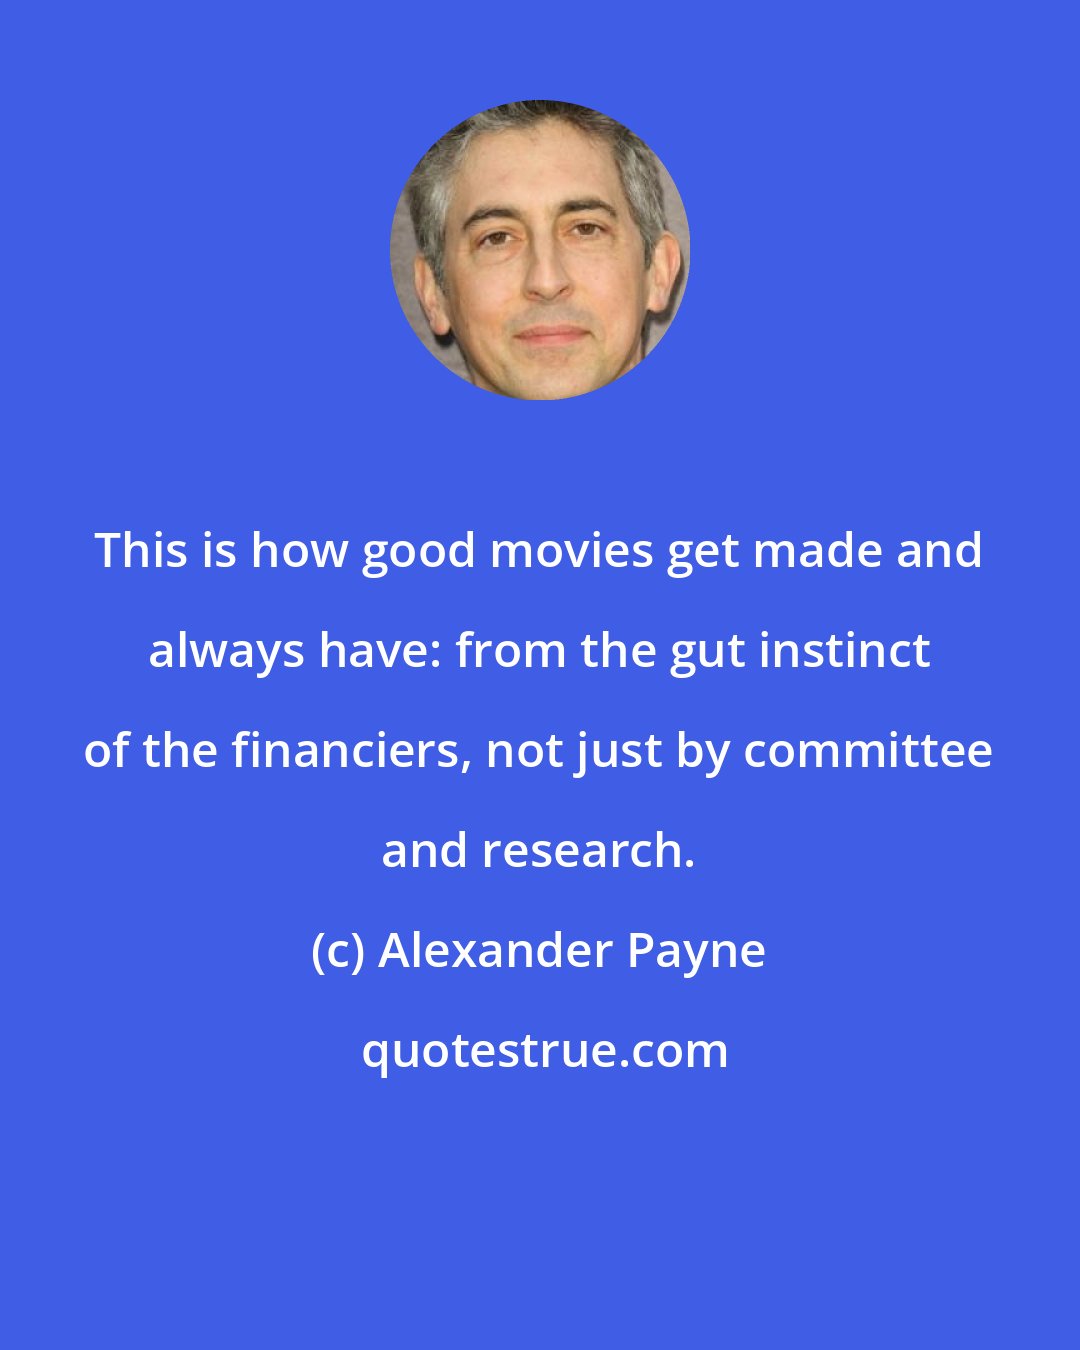 Alexander Payne: This is how good movies get made and always have: from the gut instinct of the financiers, not just by committee and research.